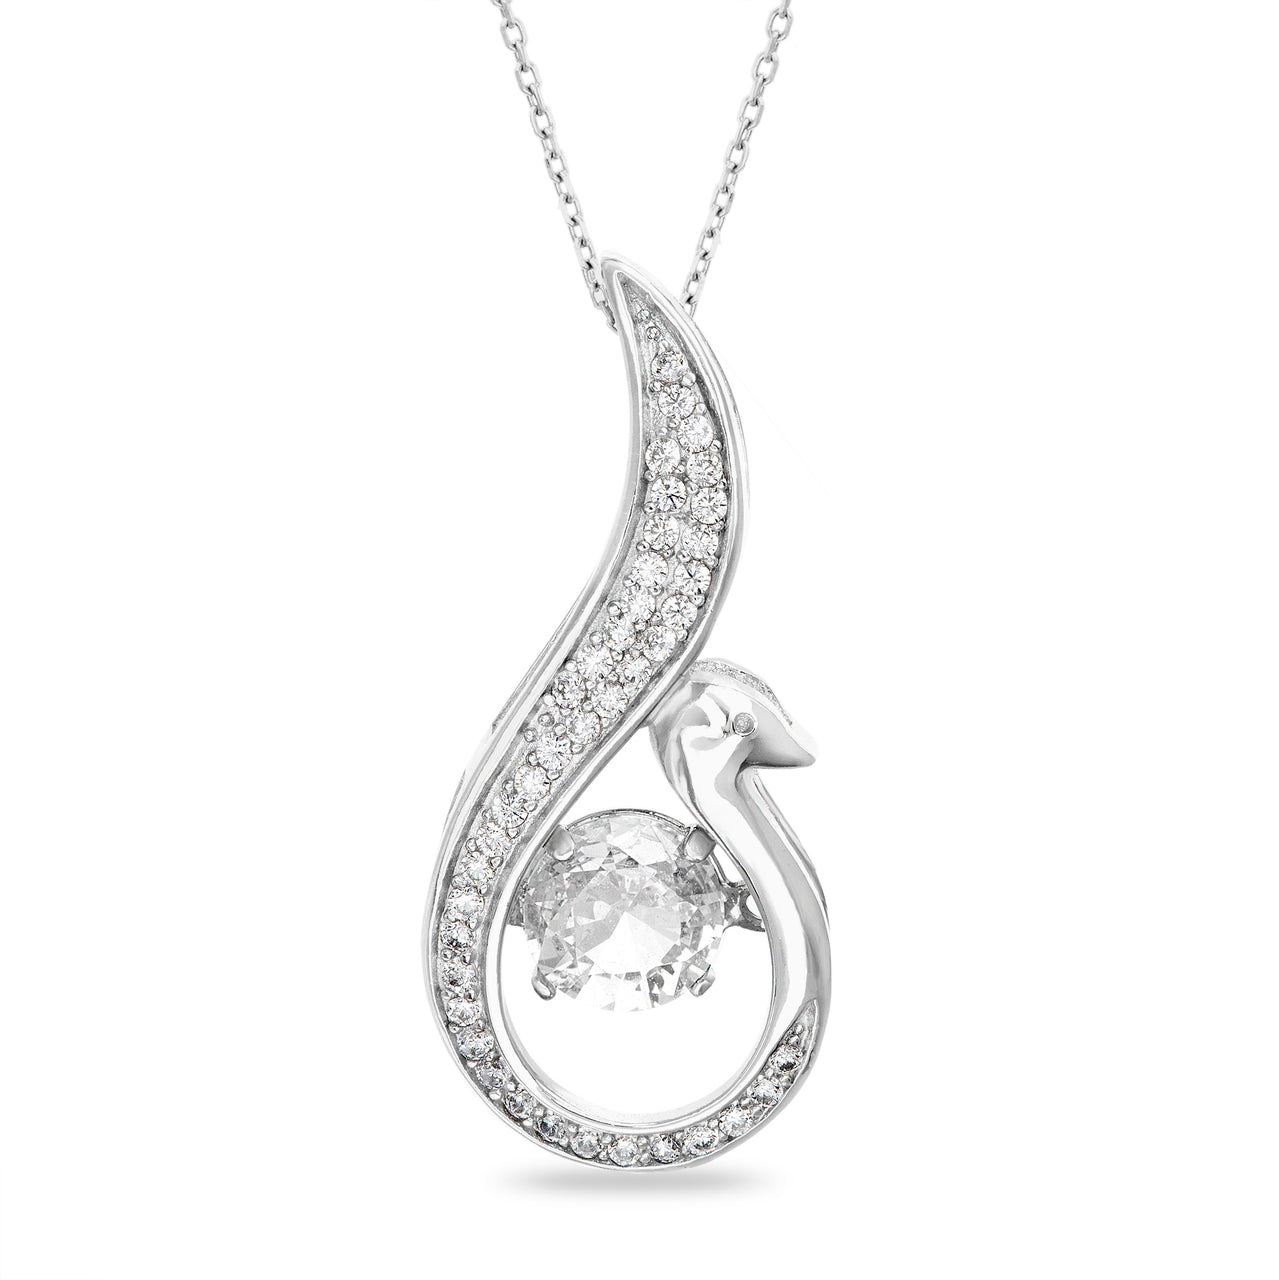 Lesa Michele Cubic Zirconia Dancing Swirl Necklace in Rhodium Plated Sterling Silver